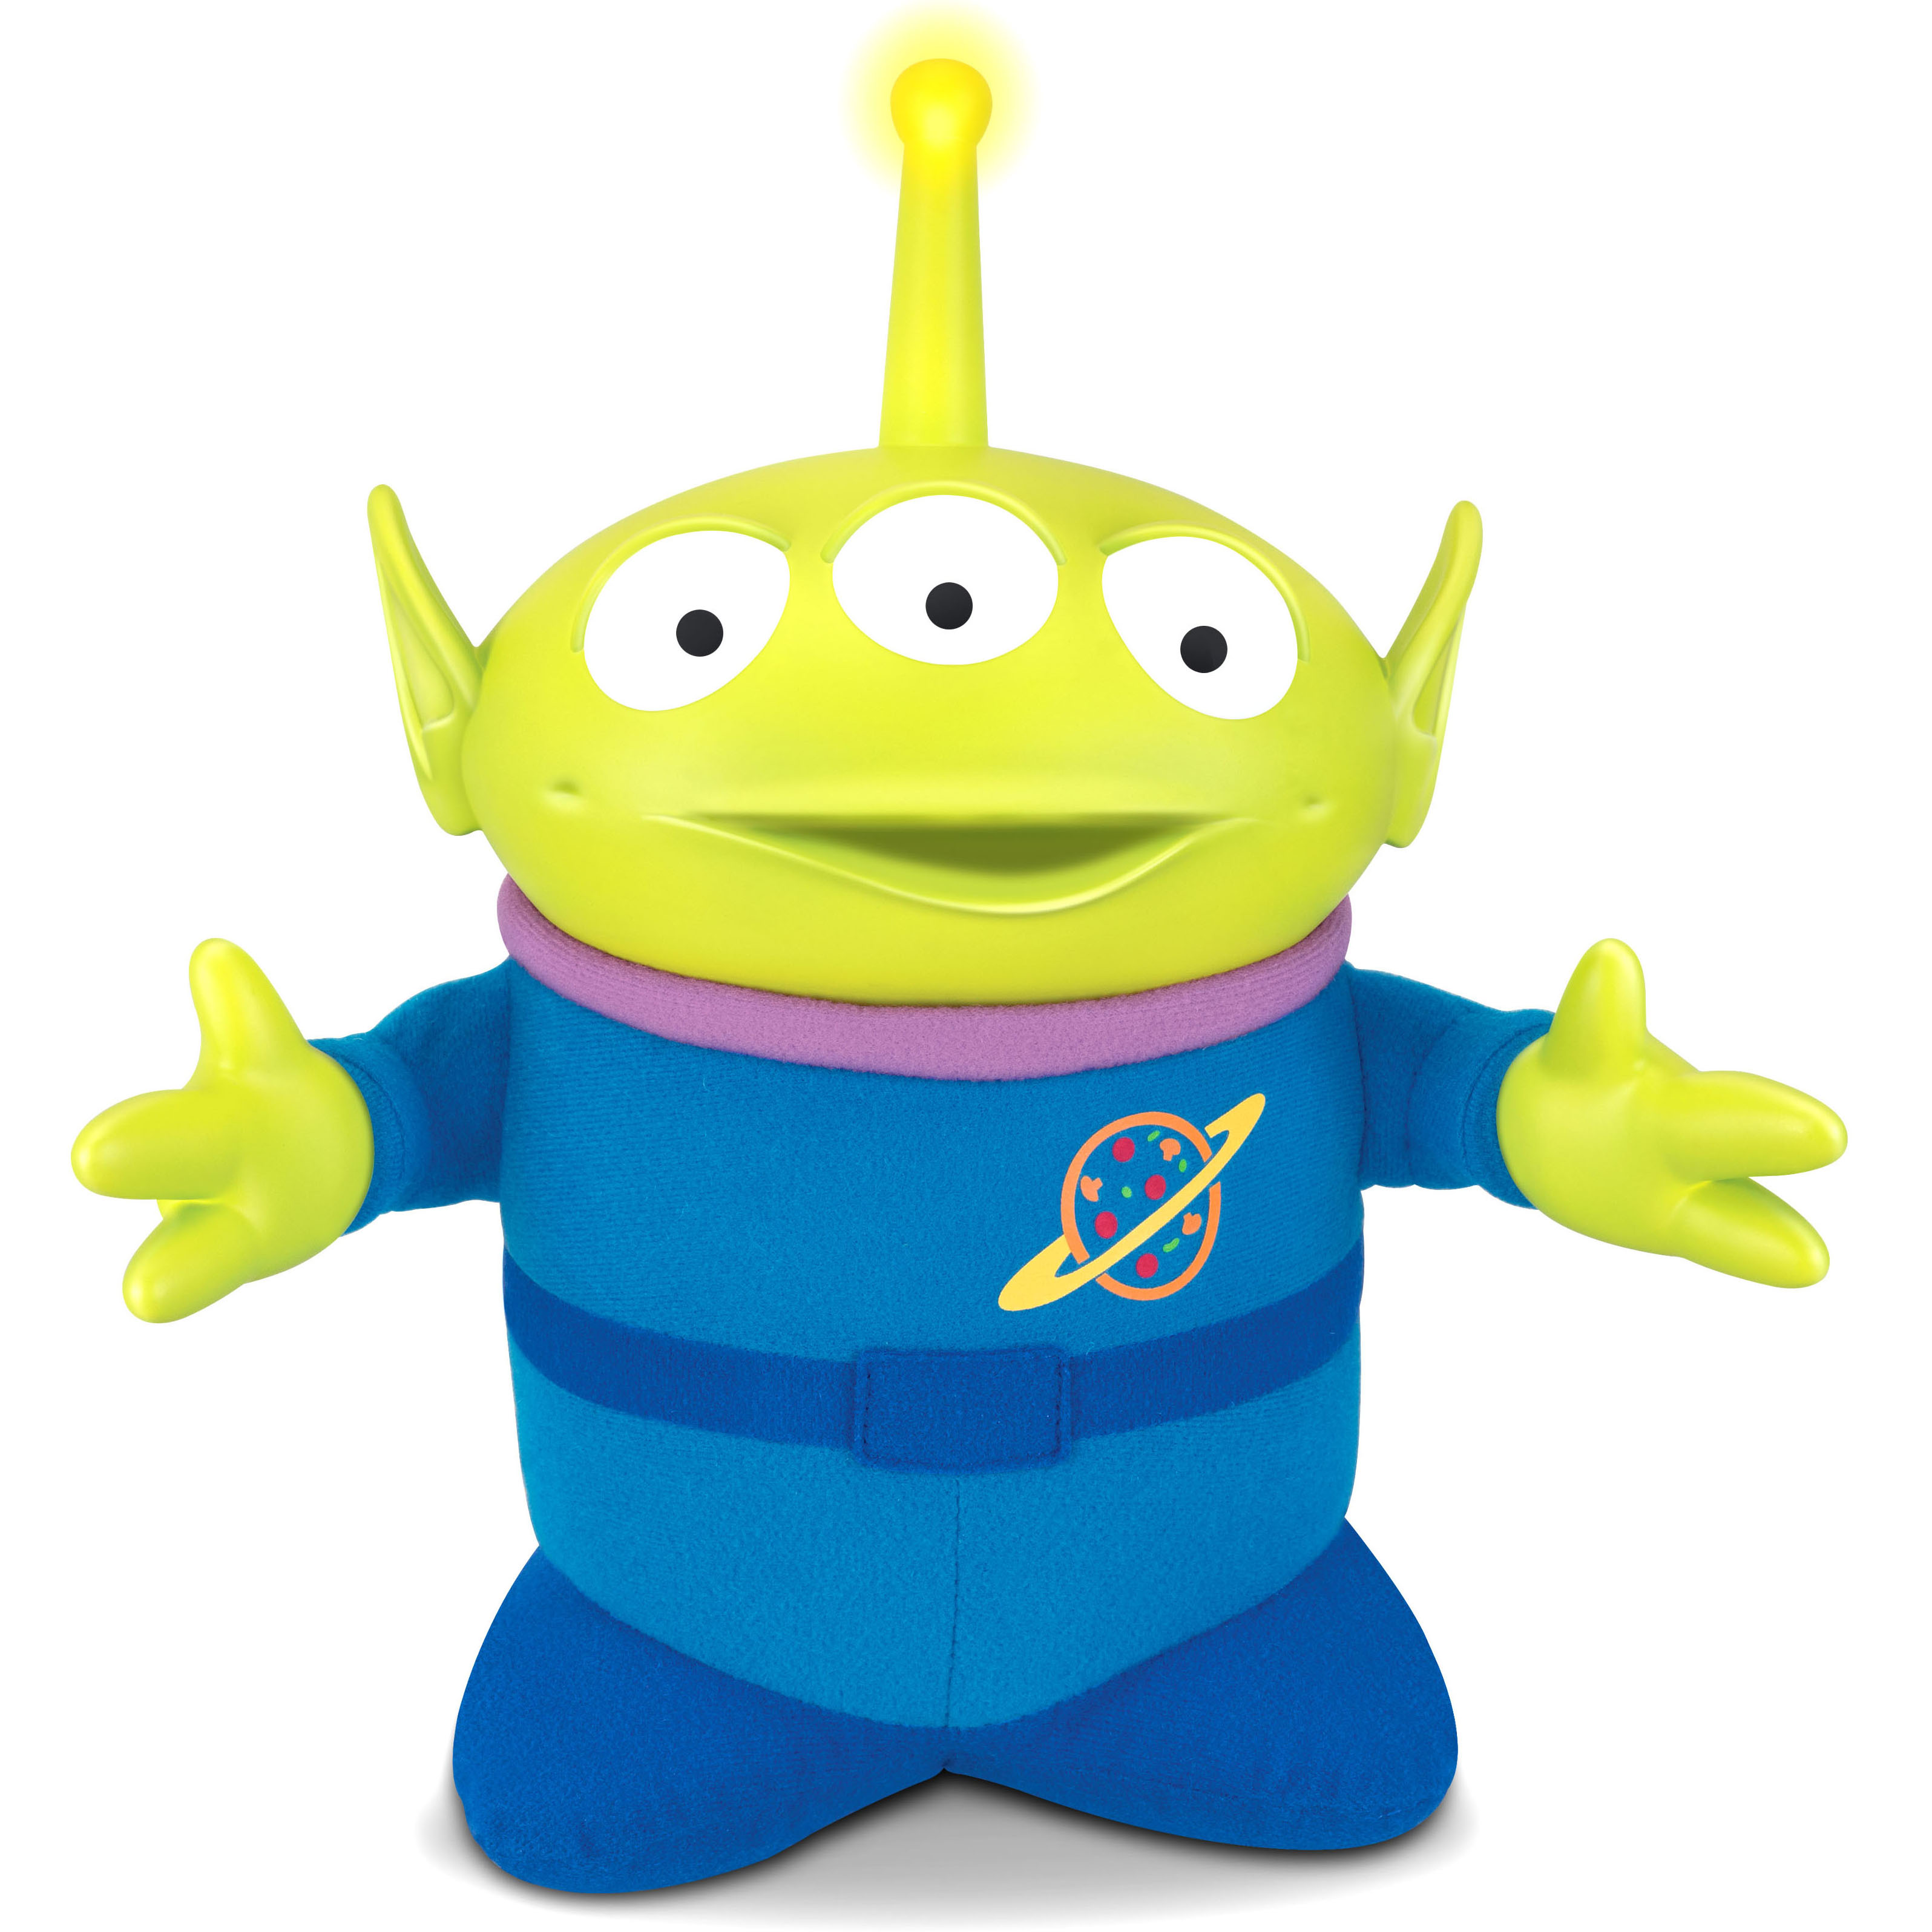 Disney Pixar Toy Story SPACE ALIEN Talks with Light-Up Antenna - image 2 of 5